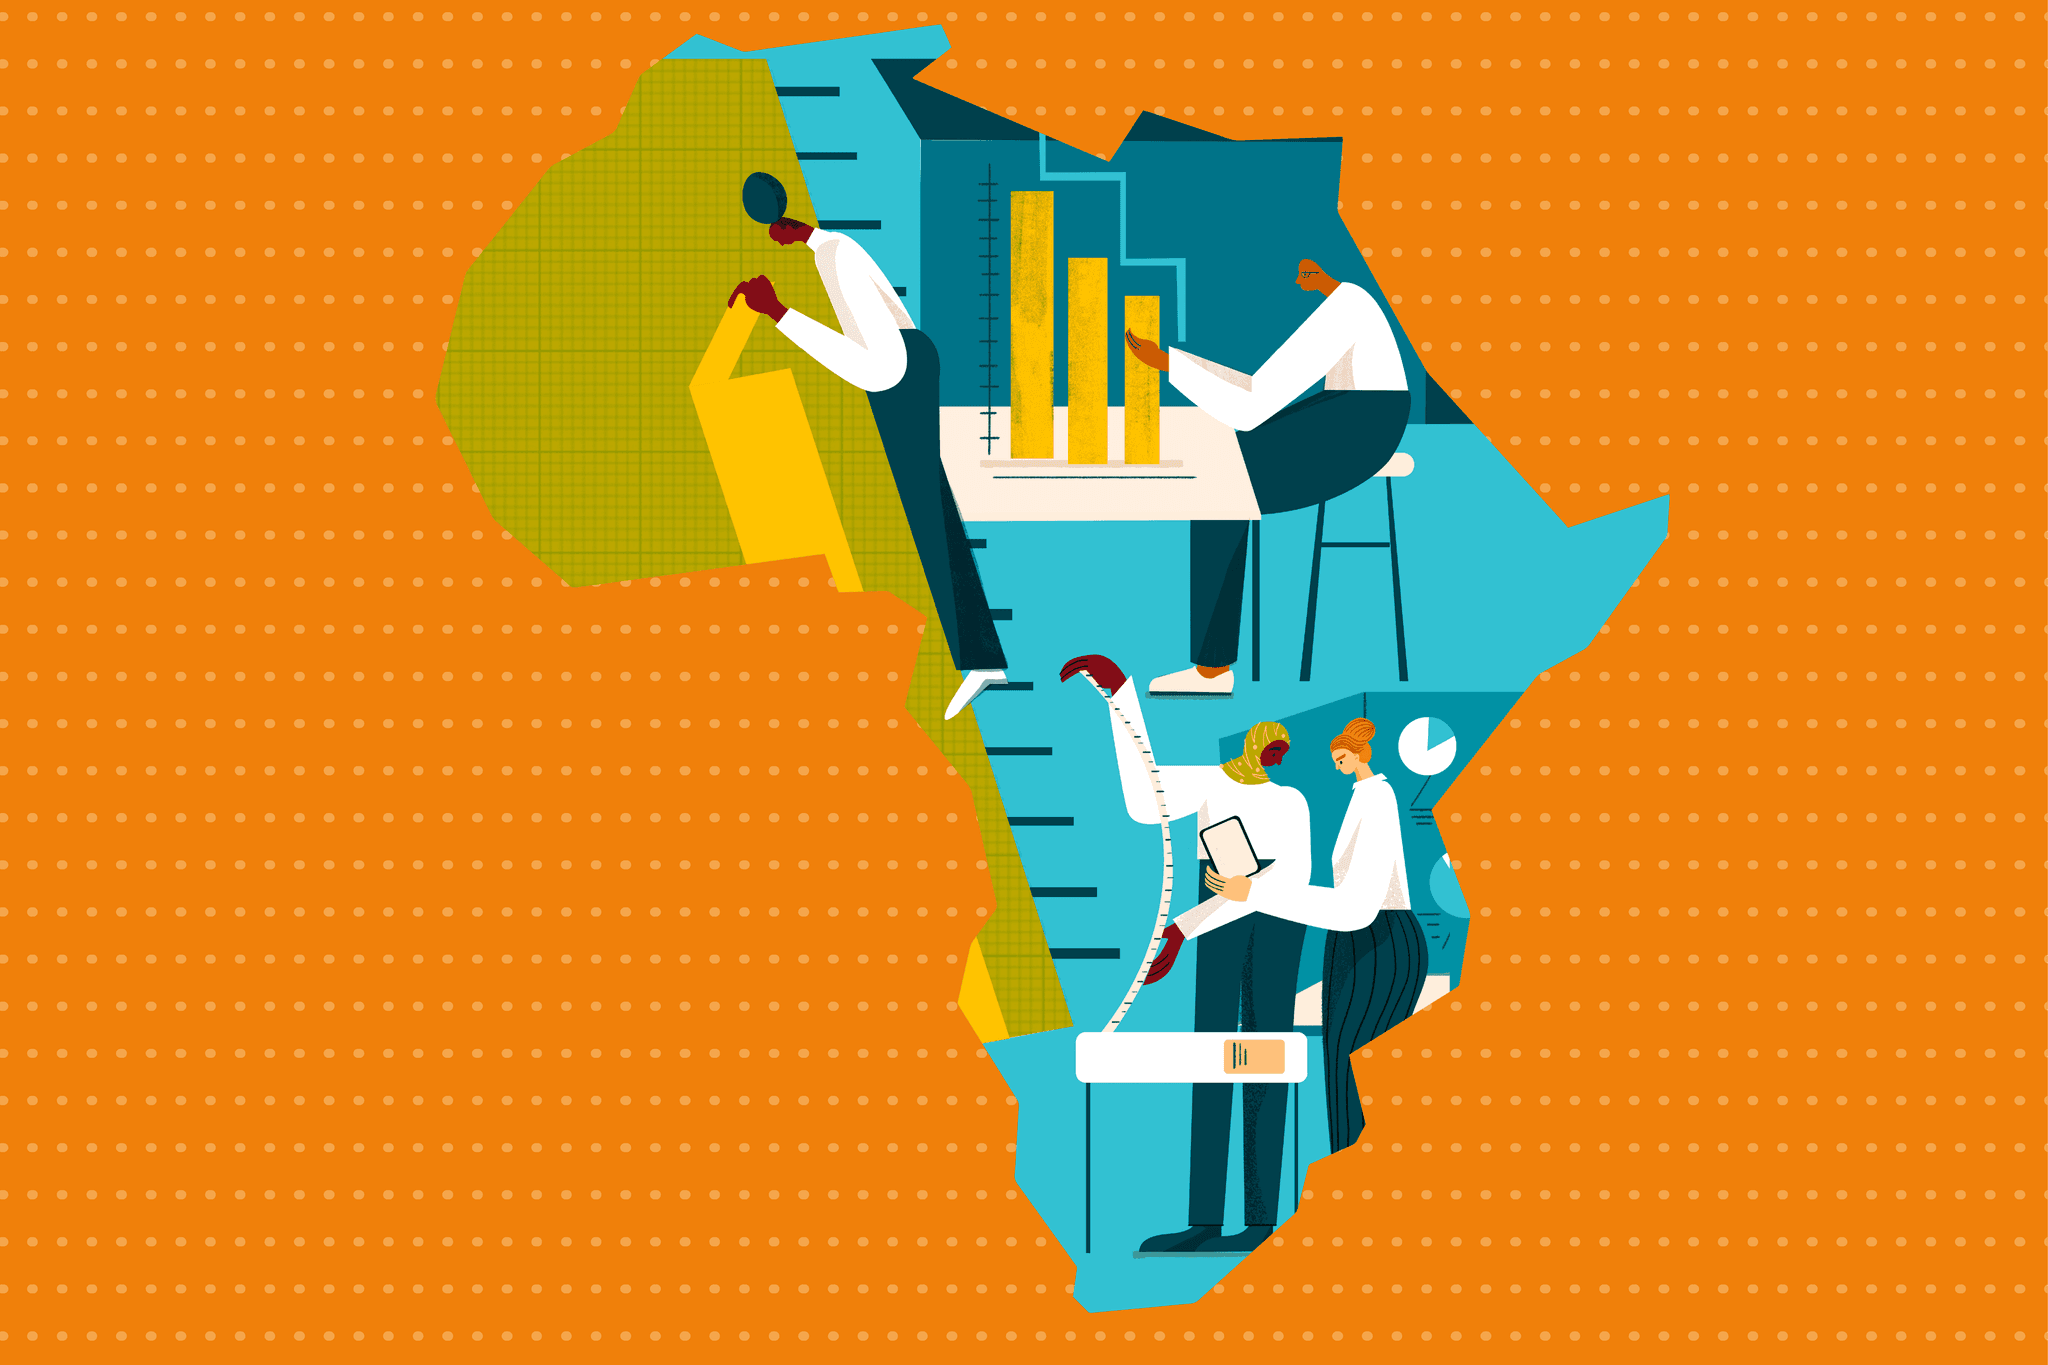 A colourful illustration of four data scientists at work; they're measuring, examining and analysing all sorts of abstract looking data. The illustration is framed by the outline of the continent of Africa on a bright orange background.